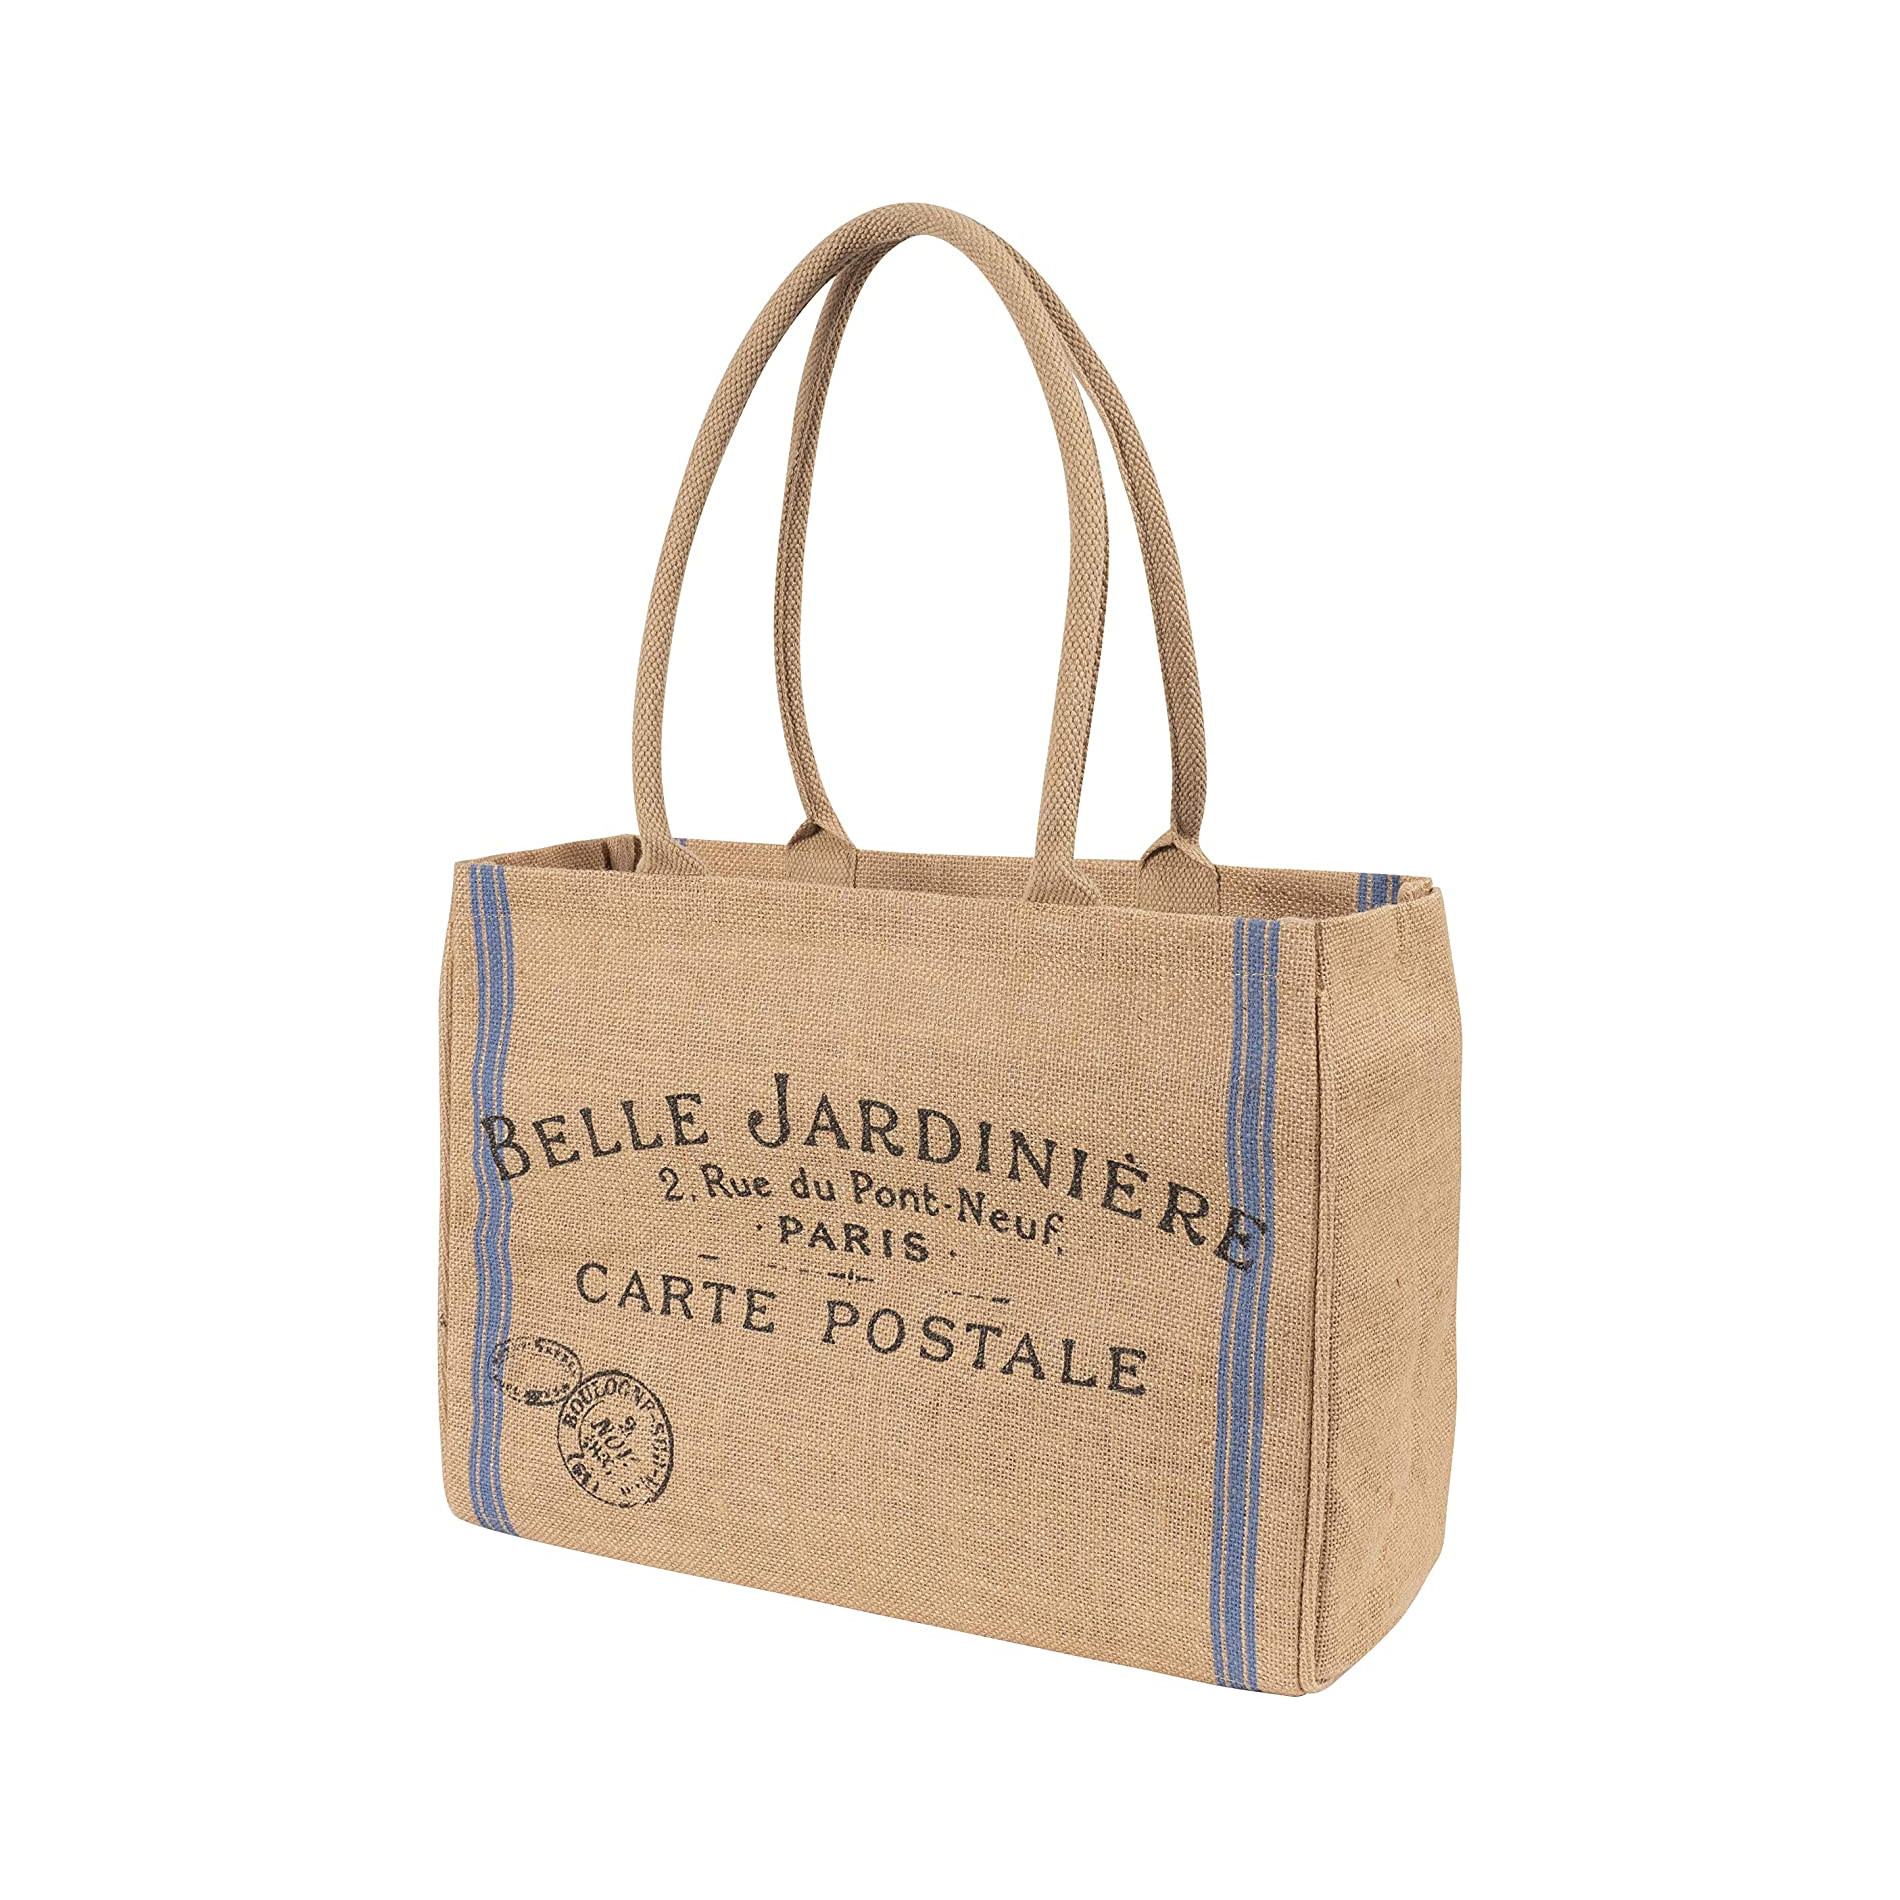 $15 – French Jardiniere Tote Bag